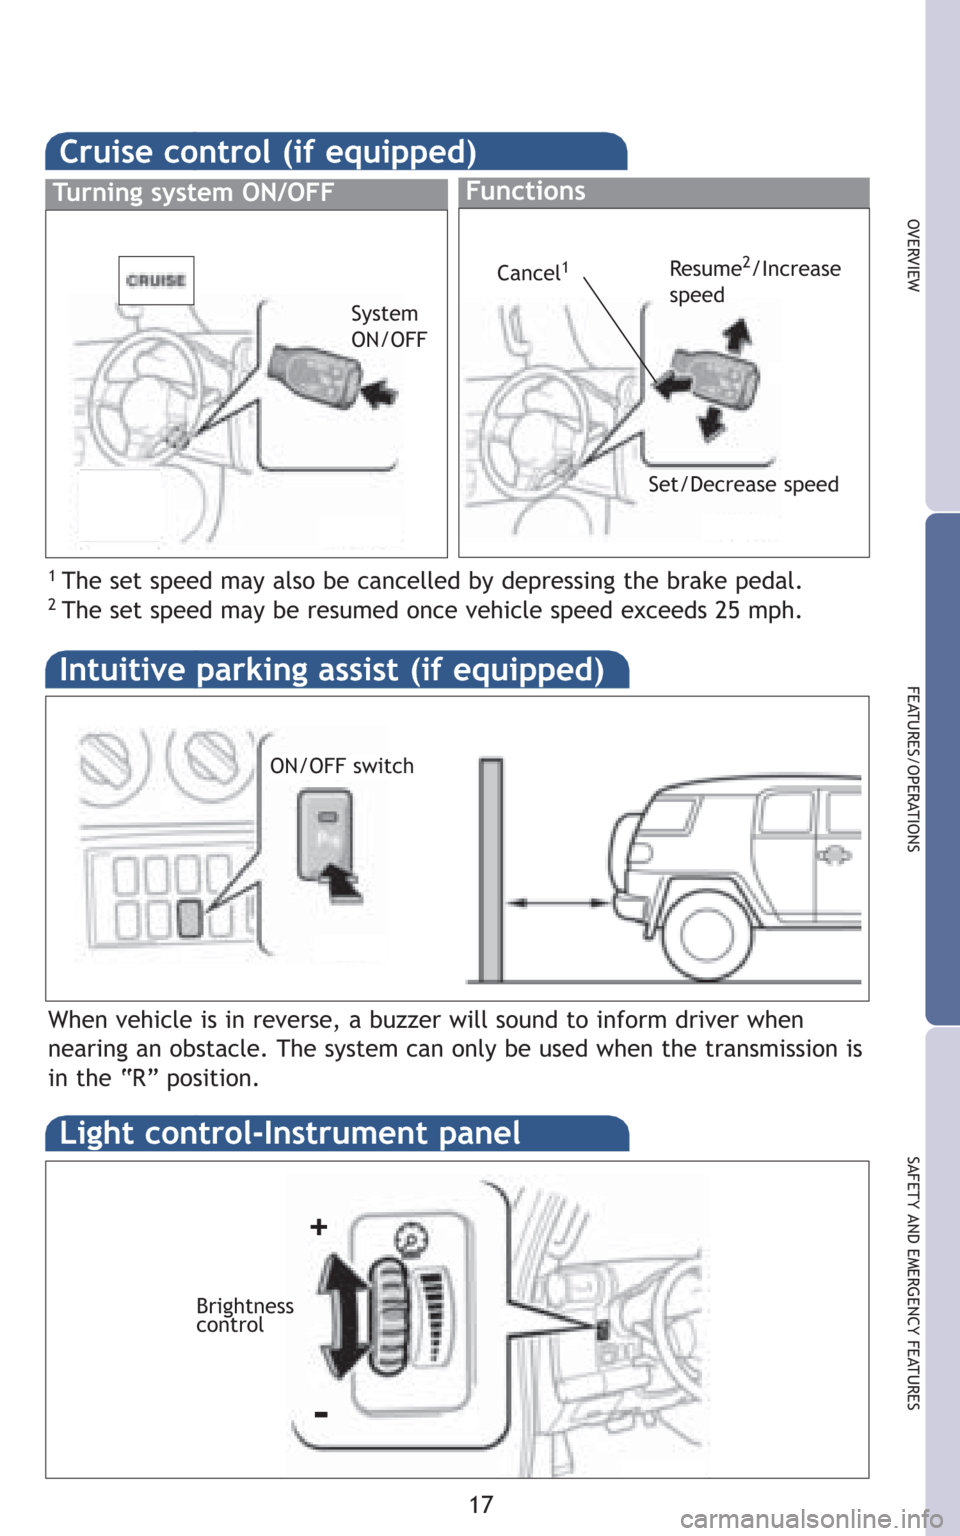 TOYOTA FJ CRUISER 2008 1.G Quick Reference Guide 17
OVERVIEW
FEATURES/OPERATIONS
SAFETY AND EMERGENCY FEATURESLight control-Instrument panel
Brightness 
control
+
-
When vehicle is in reverse, a buzzer will sound to inform driver when
nearing an obs